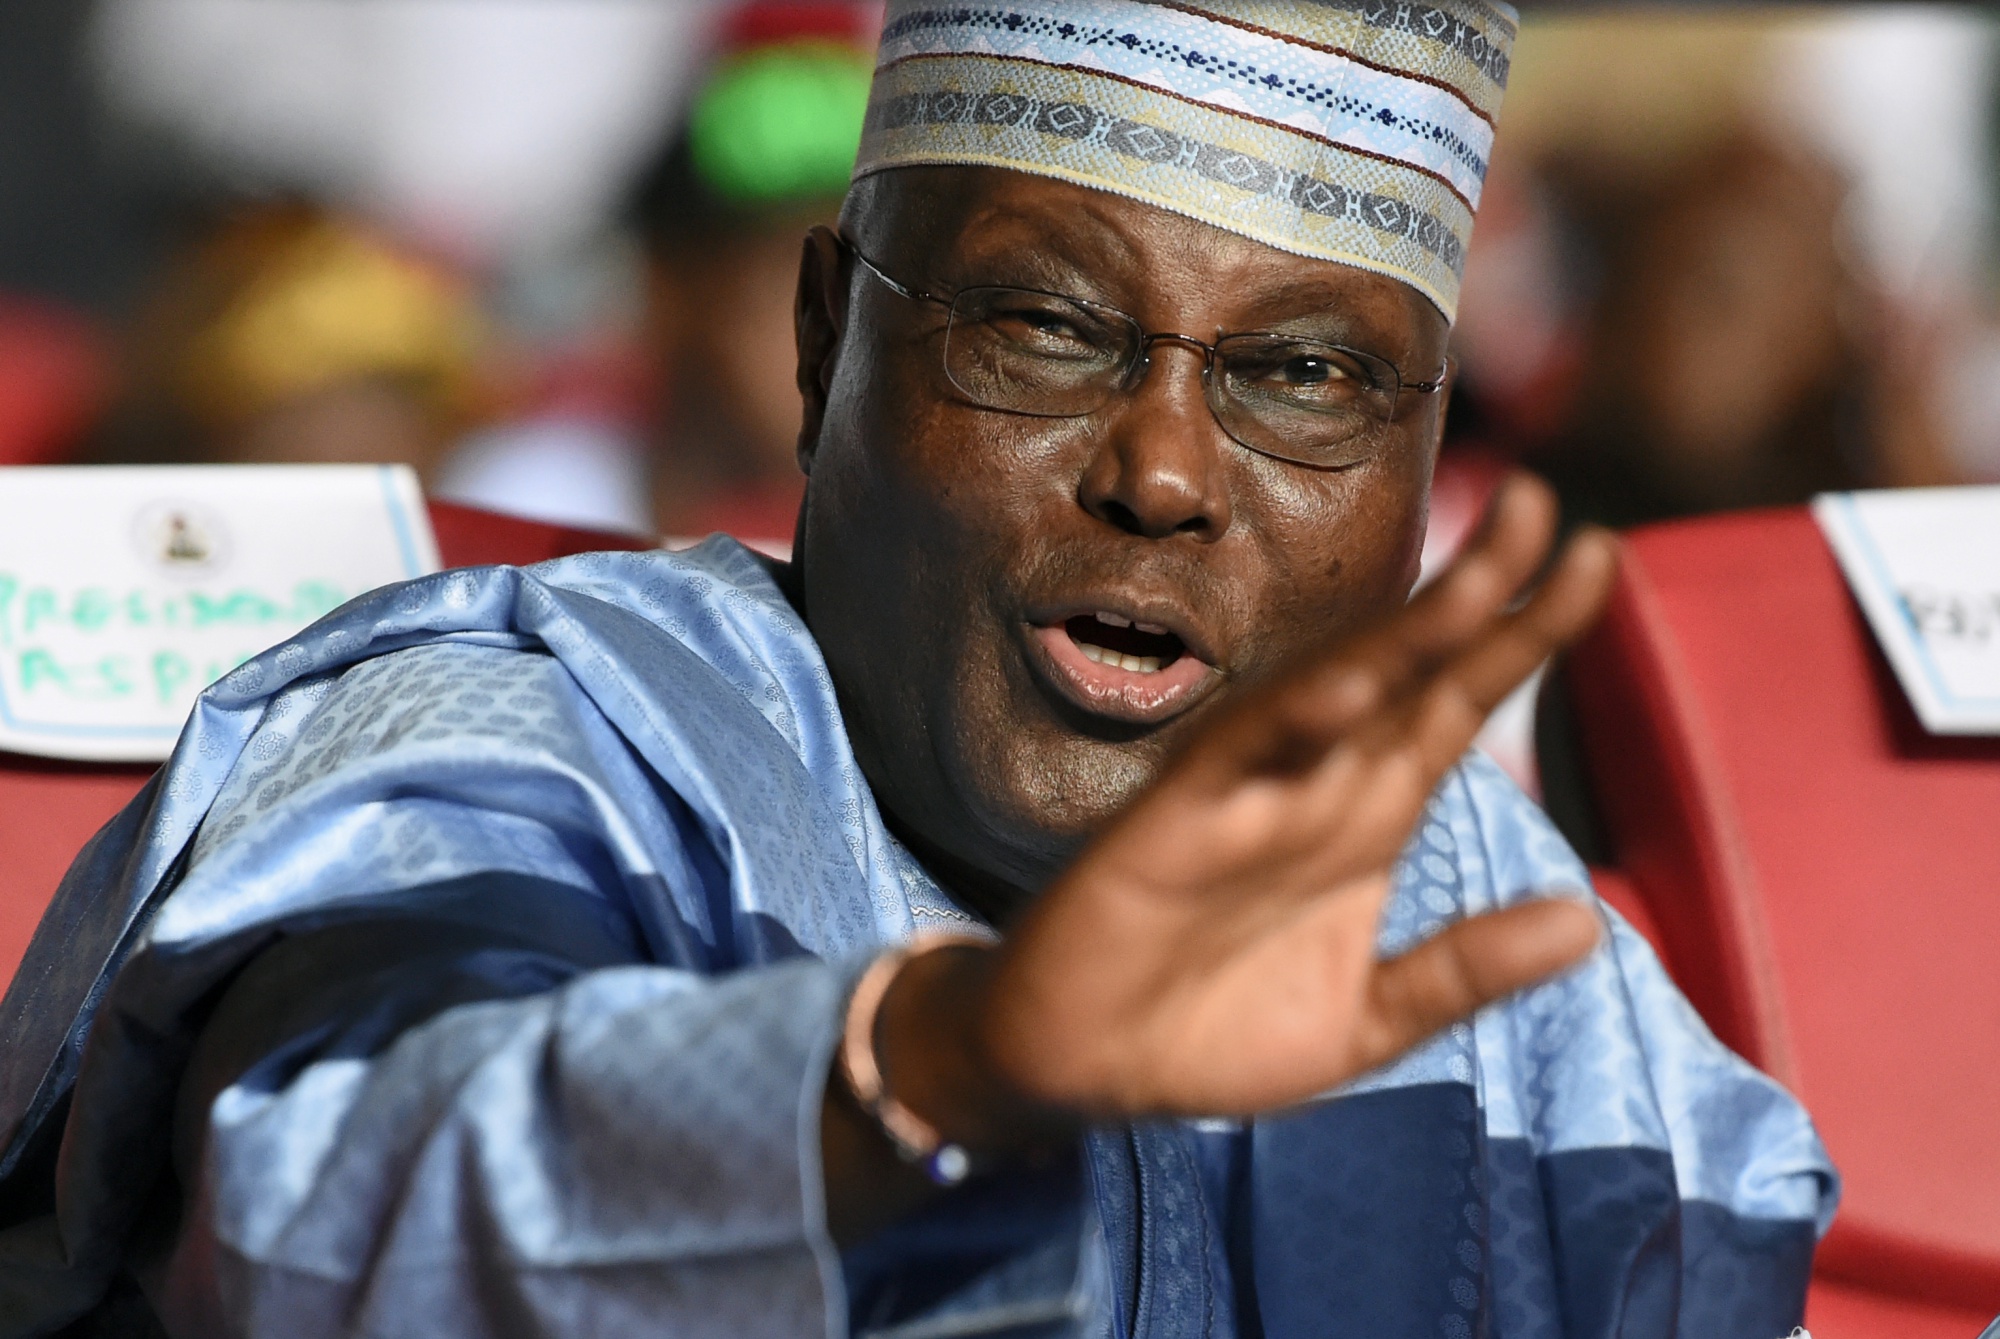 Atiku Abubakar, the former VP of Nigeria, has sold off his holding in Intels, as the logistics company faces a number of challenges.